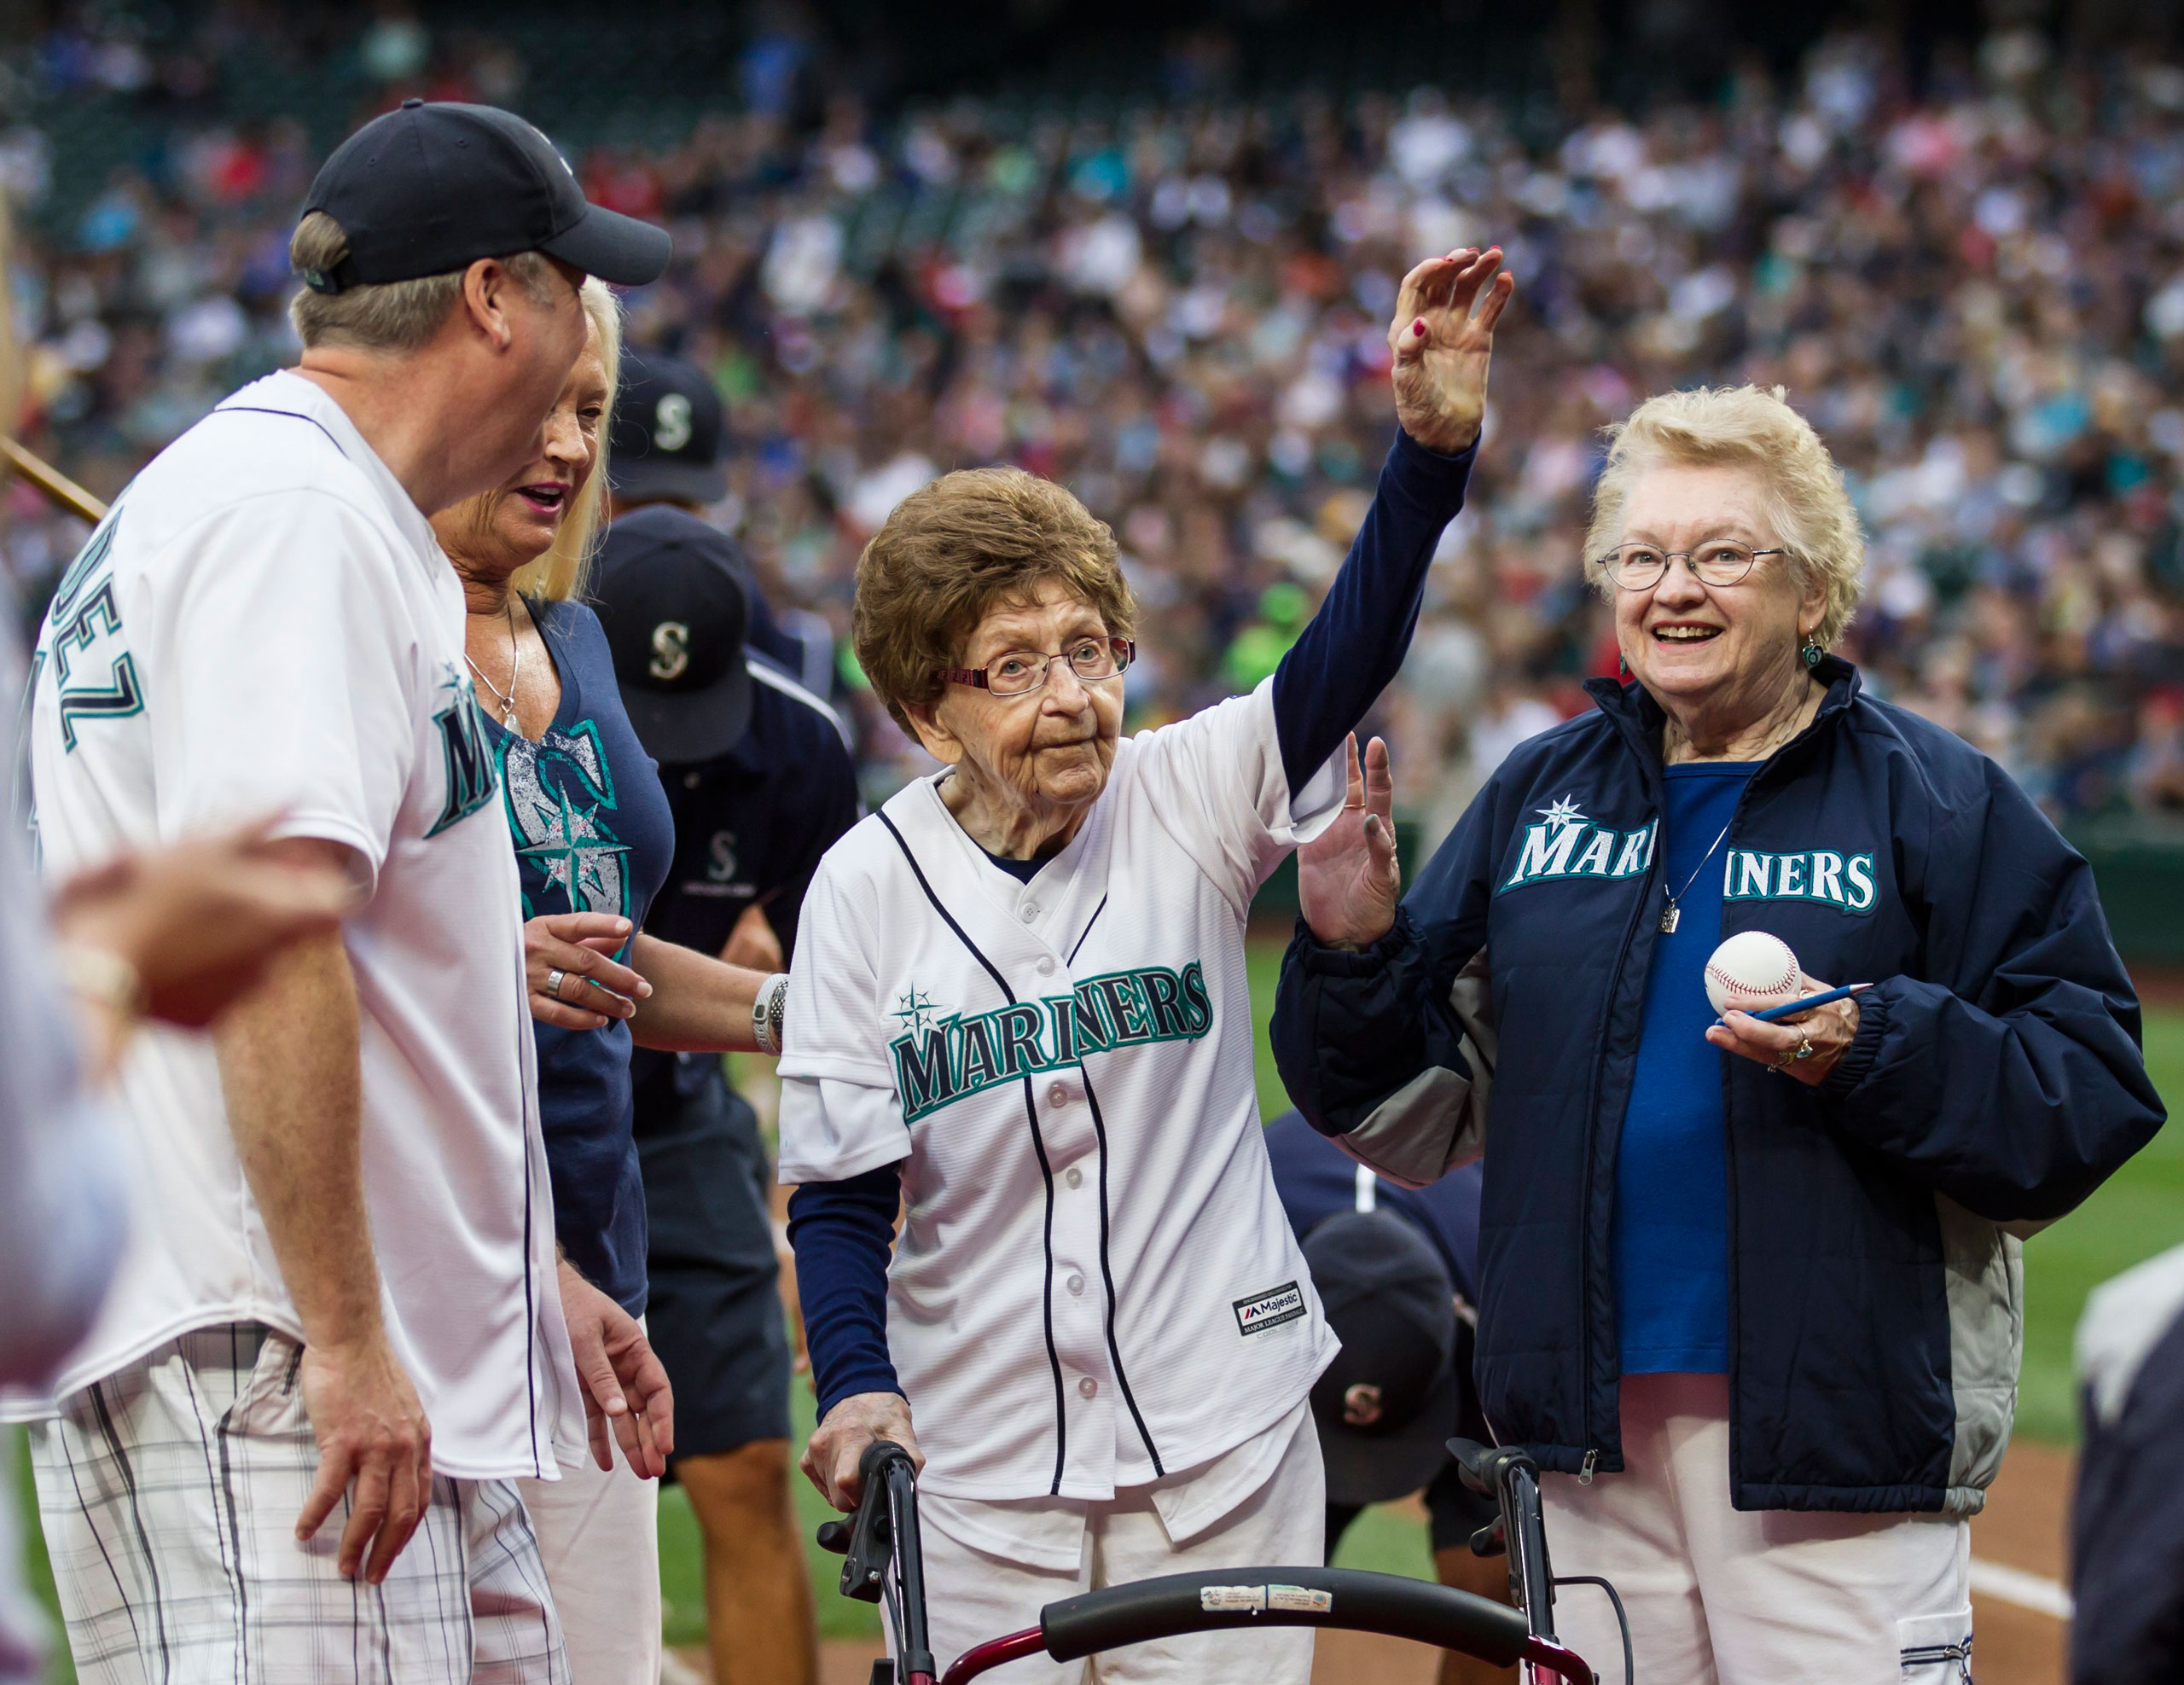 108-year-old Evelyn Jones of Woodinville, Wash., waves to the crowd after throwing out the ceremonial first pitch on her birthday before a baseball game between the Seattle Mariners and the Los Angeles Angels, in Seattle, on July 11, 2015. (Stephen Brashear—AP)